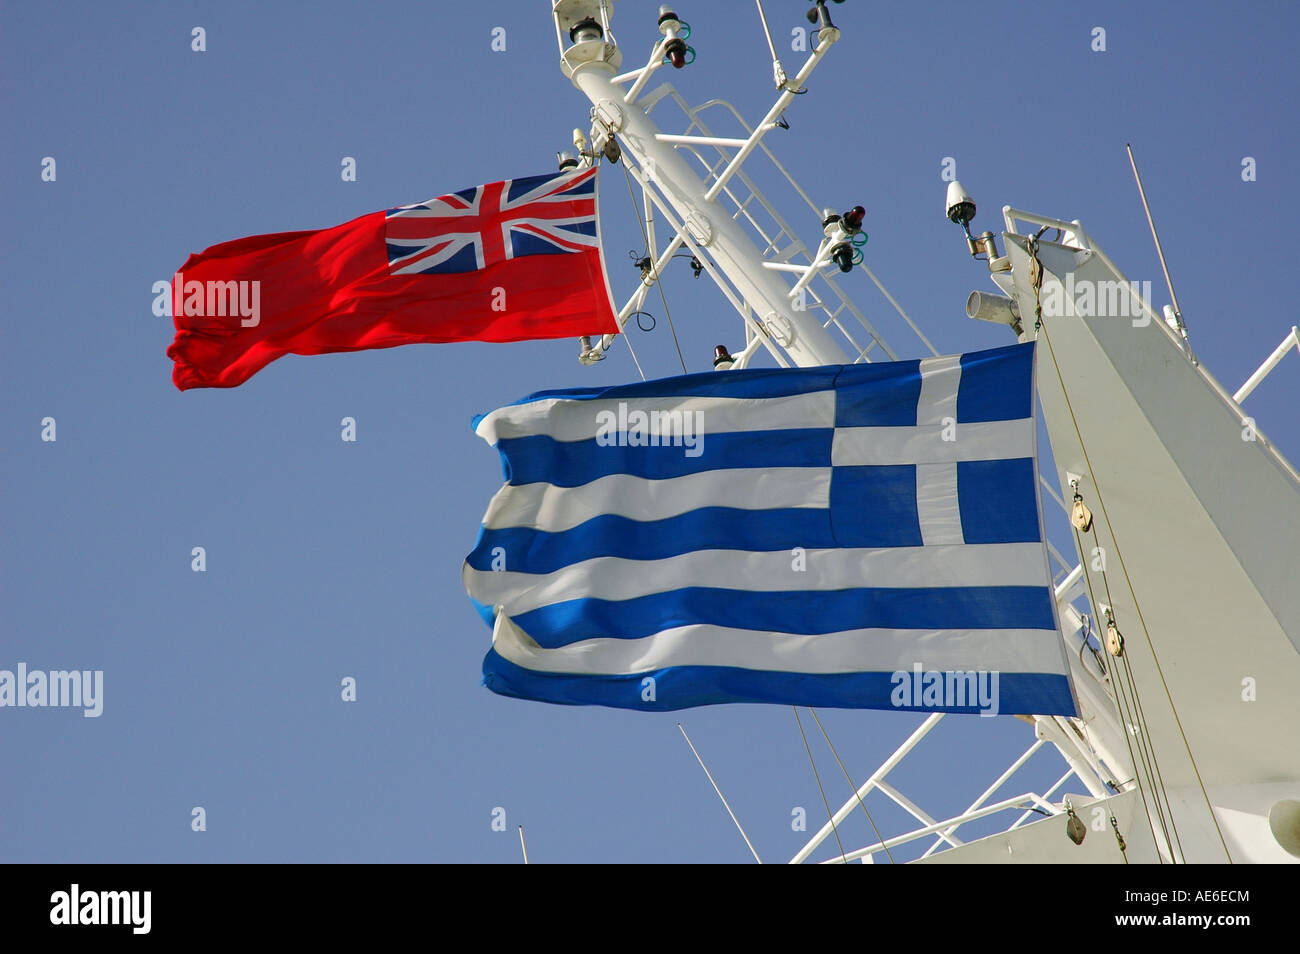 British merchant Red Ensign flag and Greek flags flying side by side on a  cruise ship Stock Photo - Alamy